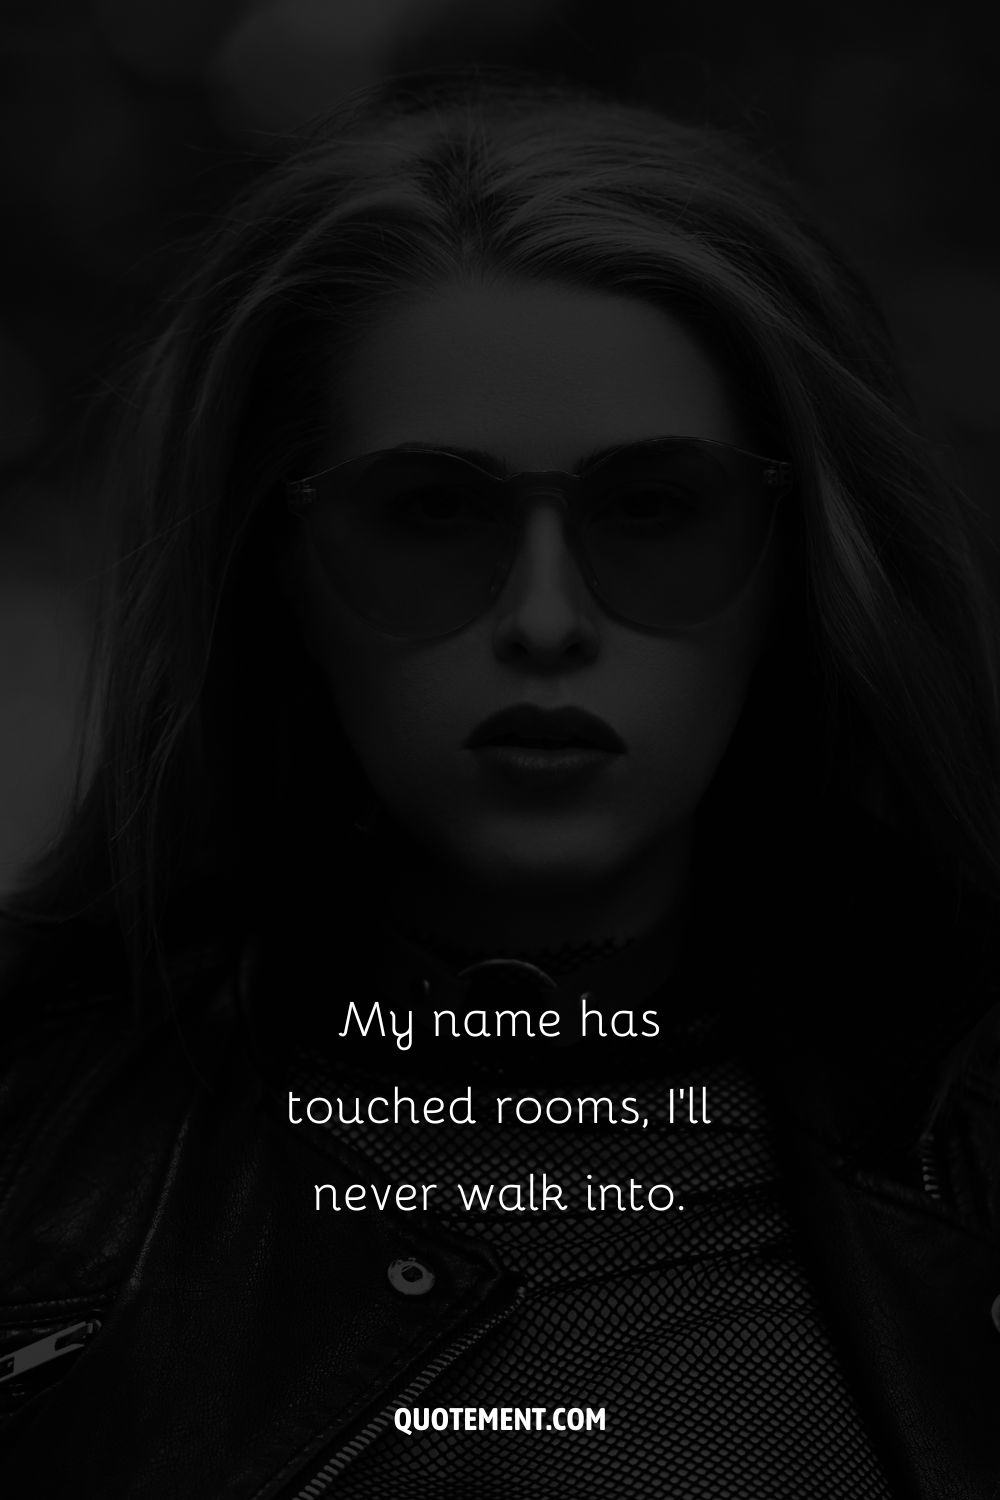 Image of a mysterious girl wearing sunglasses representing savage girl caption.